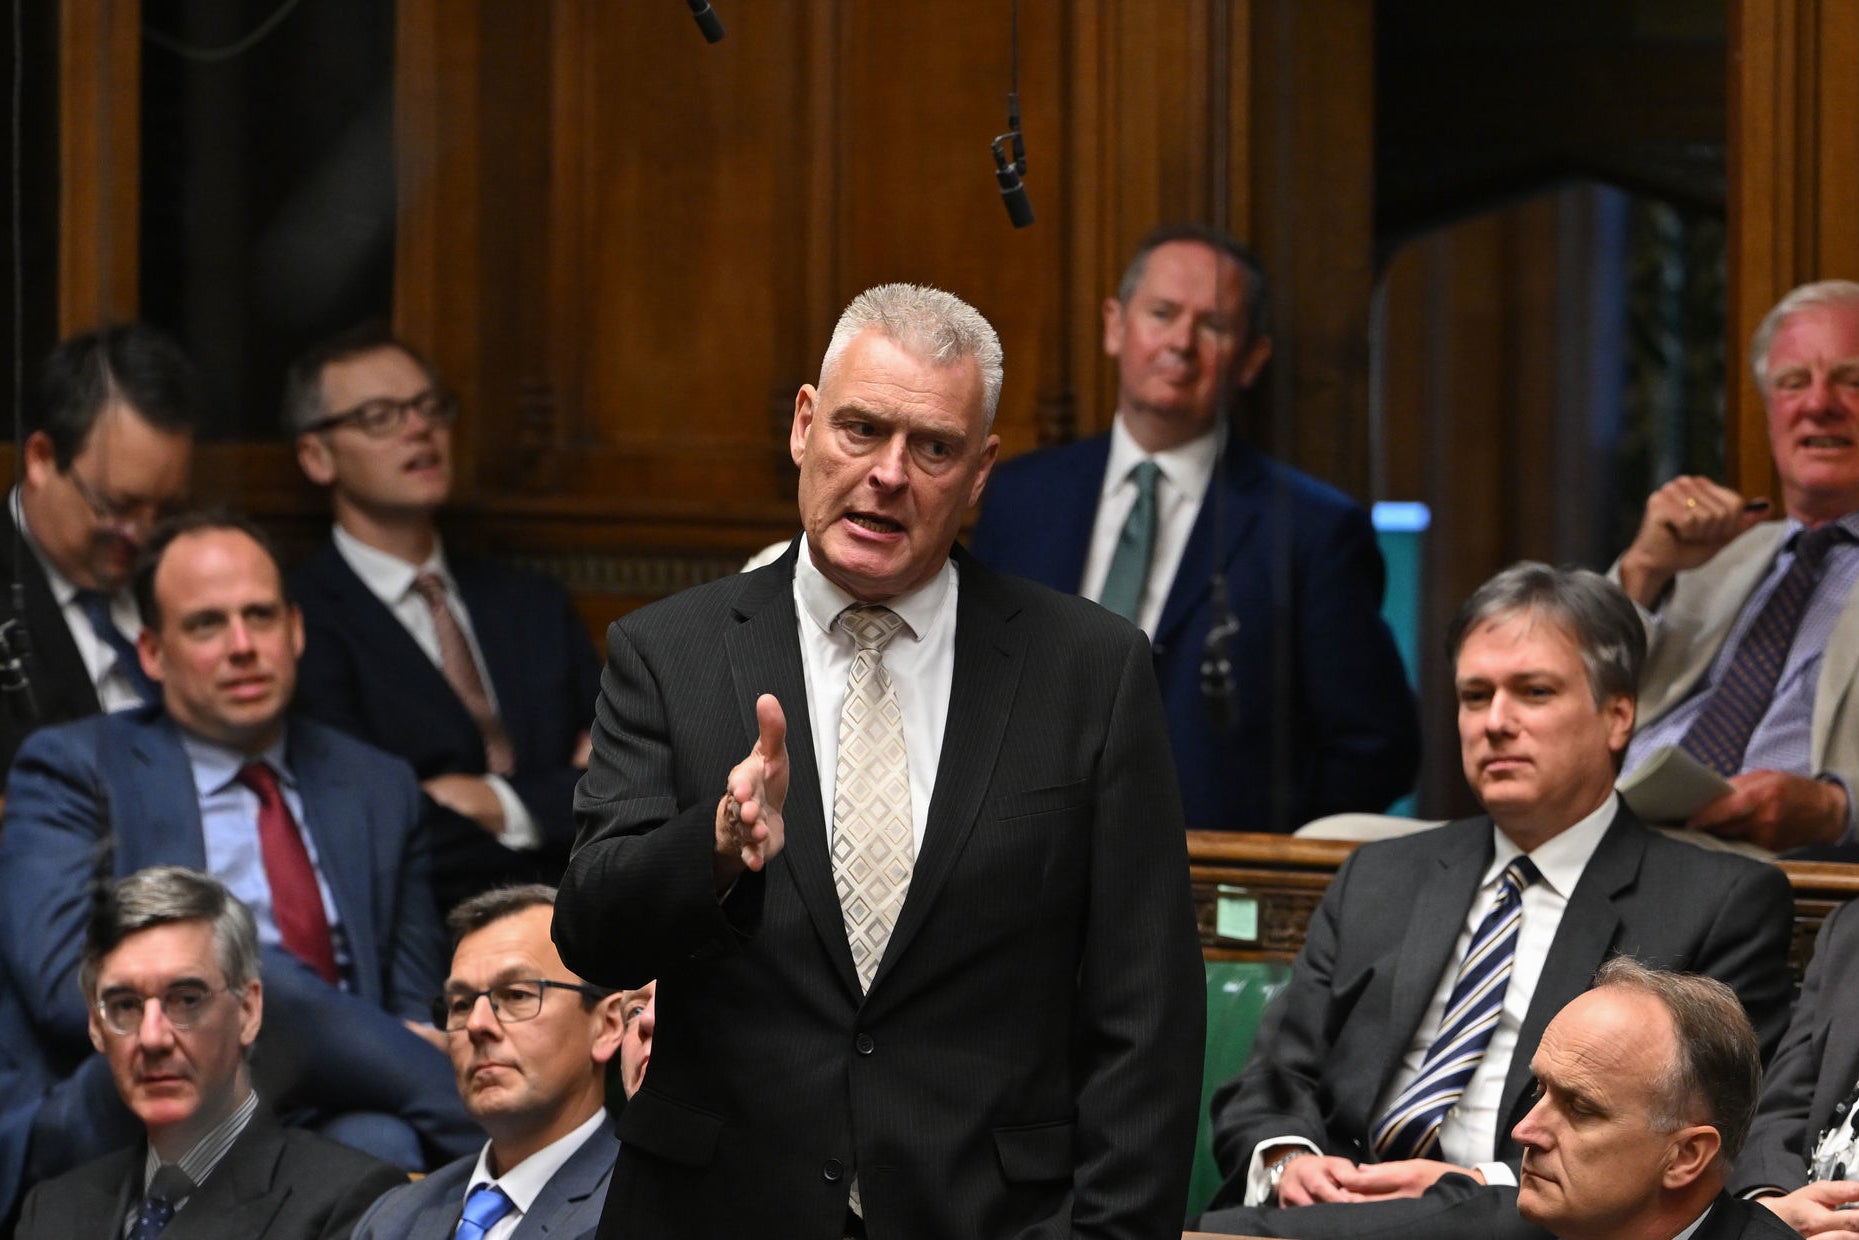 Lee Anderson became an MP in 2019